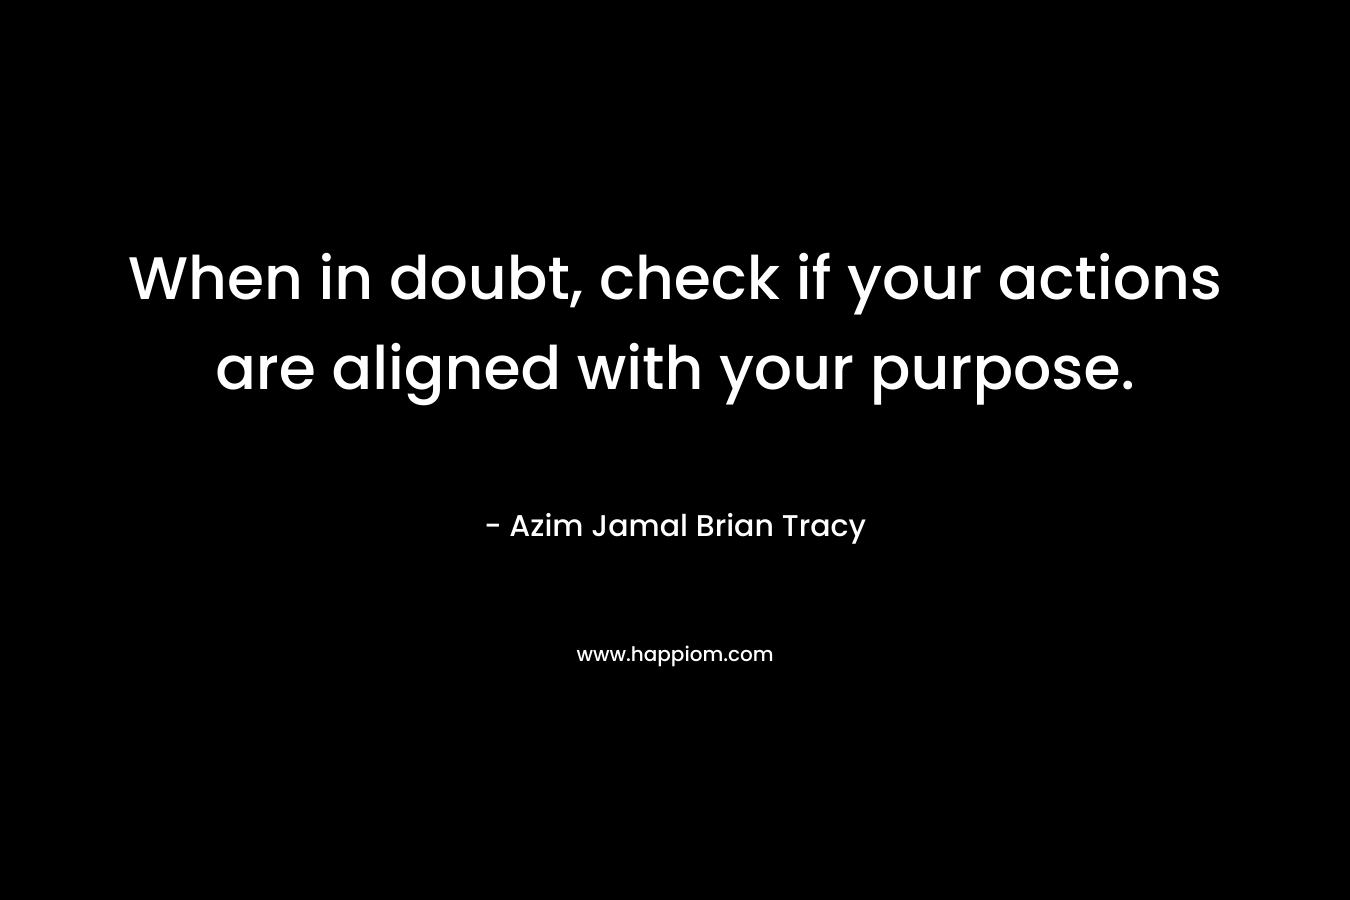 When in doubt, check if your actions are aligned with your purpose.